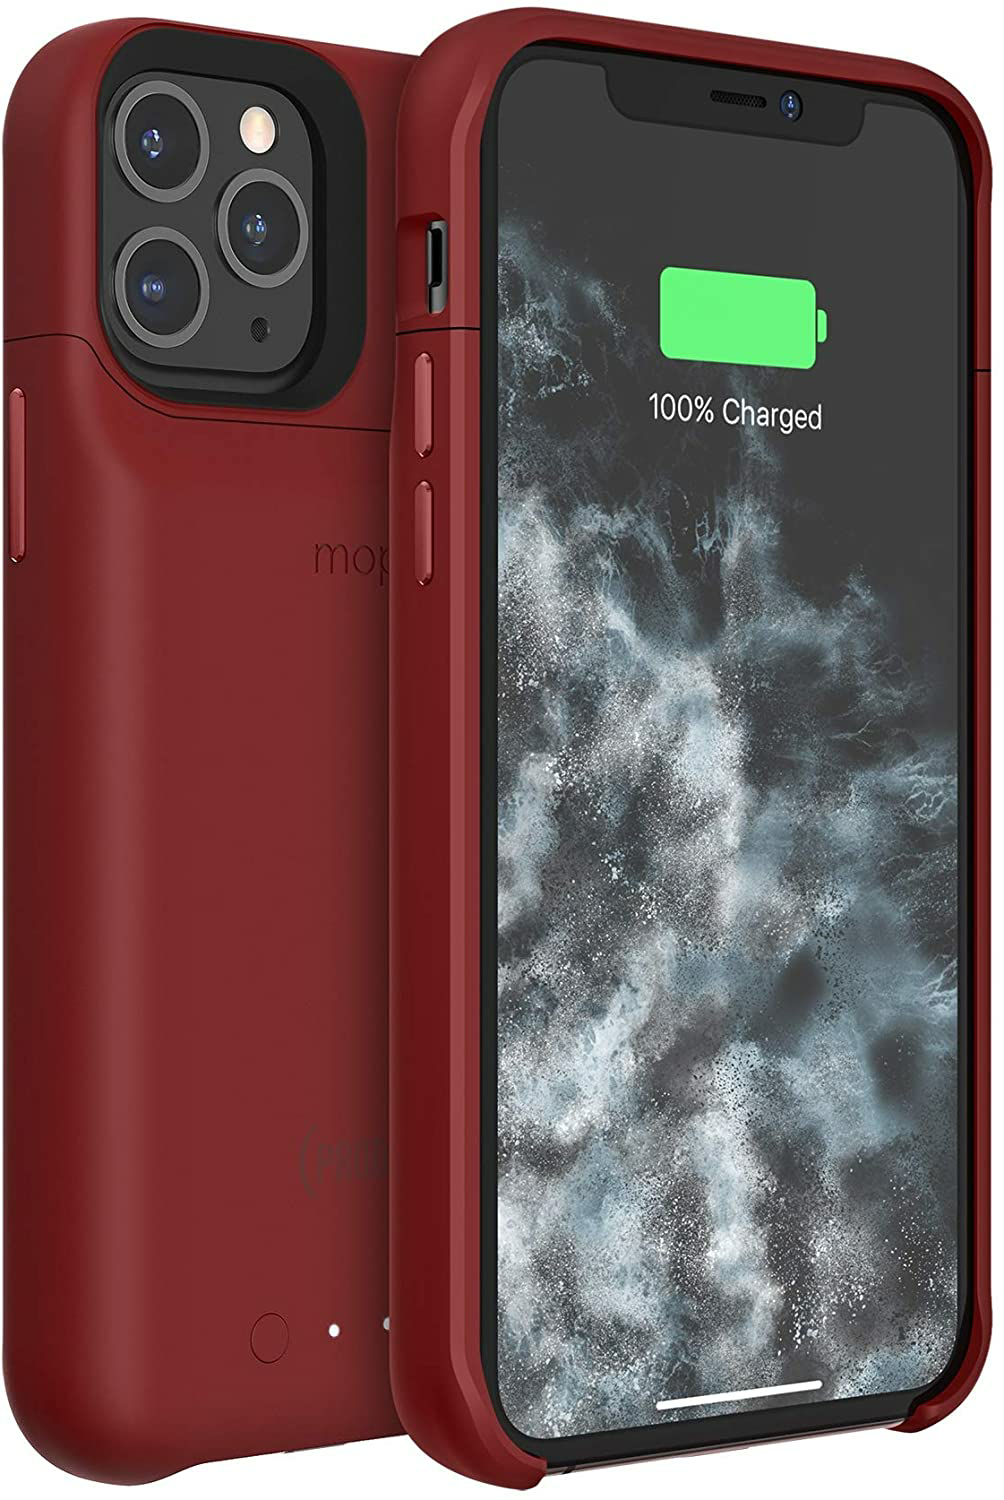 Amazon.com: mophie 401004412 Juice Pack Access - Ultra-Slim Wireless Charging Battery Case - Made for Apple iPhone 11 Pro - Product(Red) $12.99